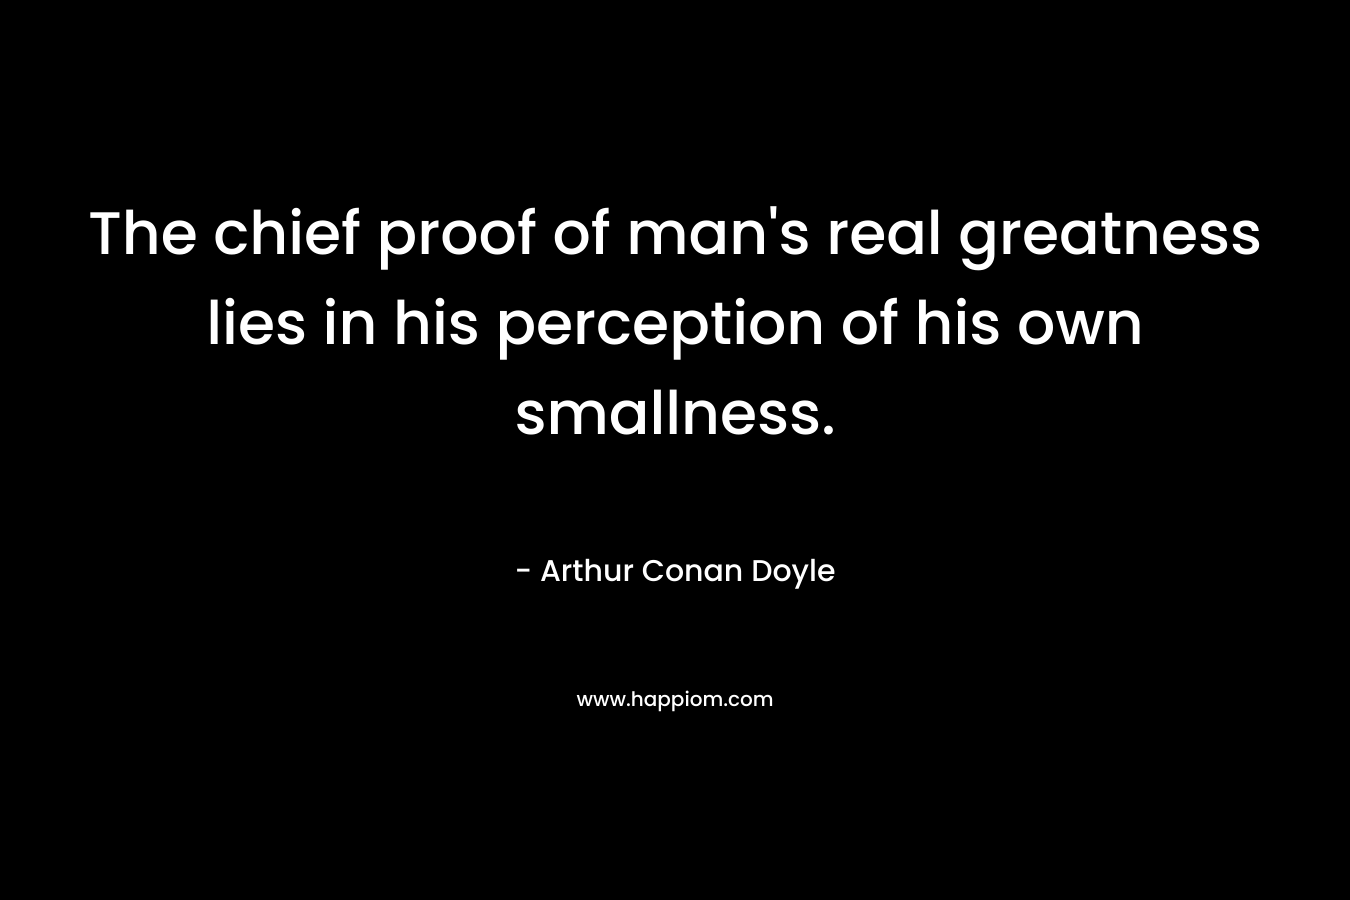 The chief proof of man's real greatness lies in his perception of his own smallness.